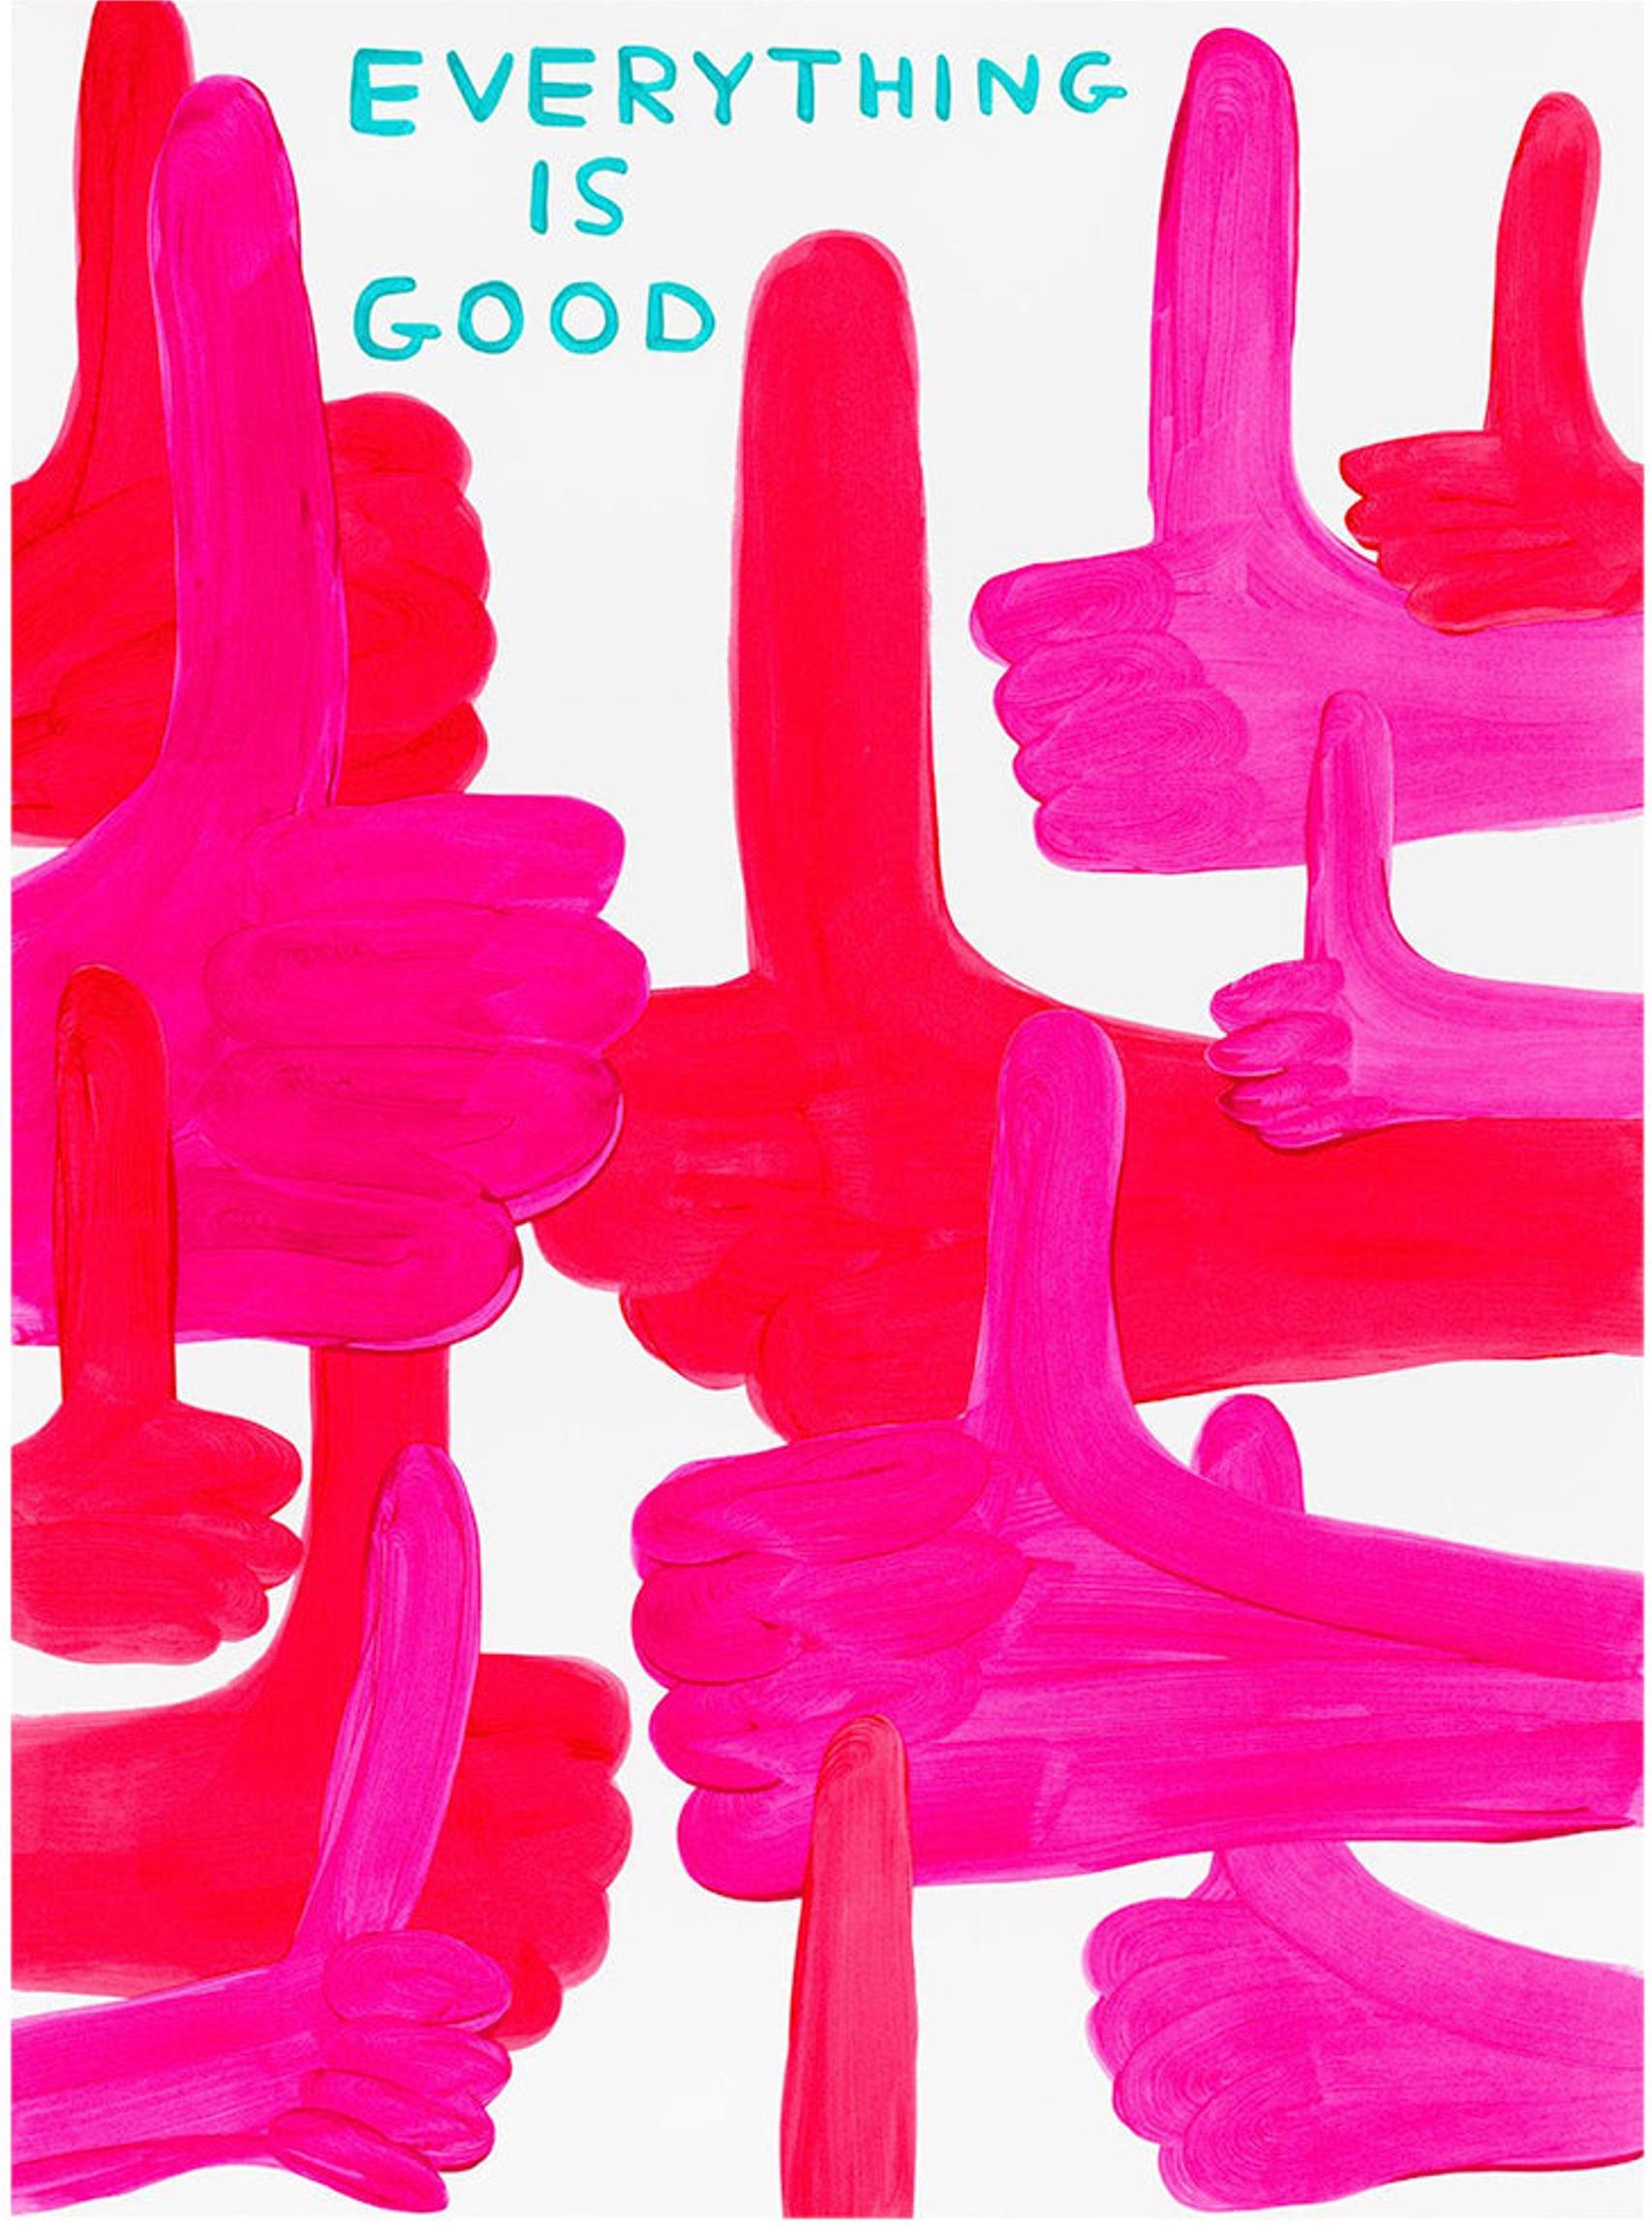 David Shrigley
Everything is Good, 2023
15 colour screenprint with a two varnish overlay printed on Somerset Satin Tub sized 410 gsm
29 1/2 × 22 in  75 × 56 cm
Edition of 125